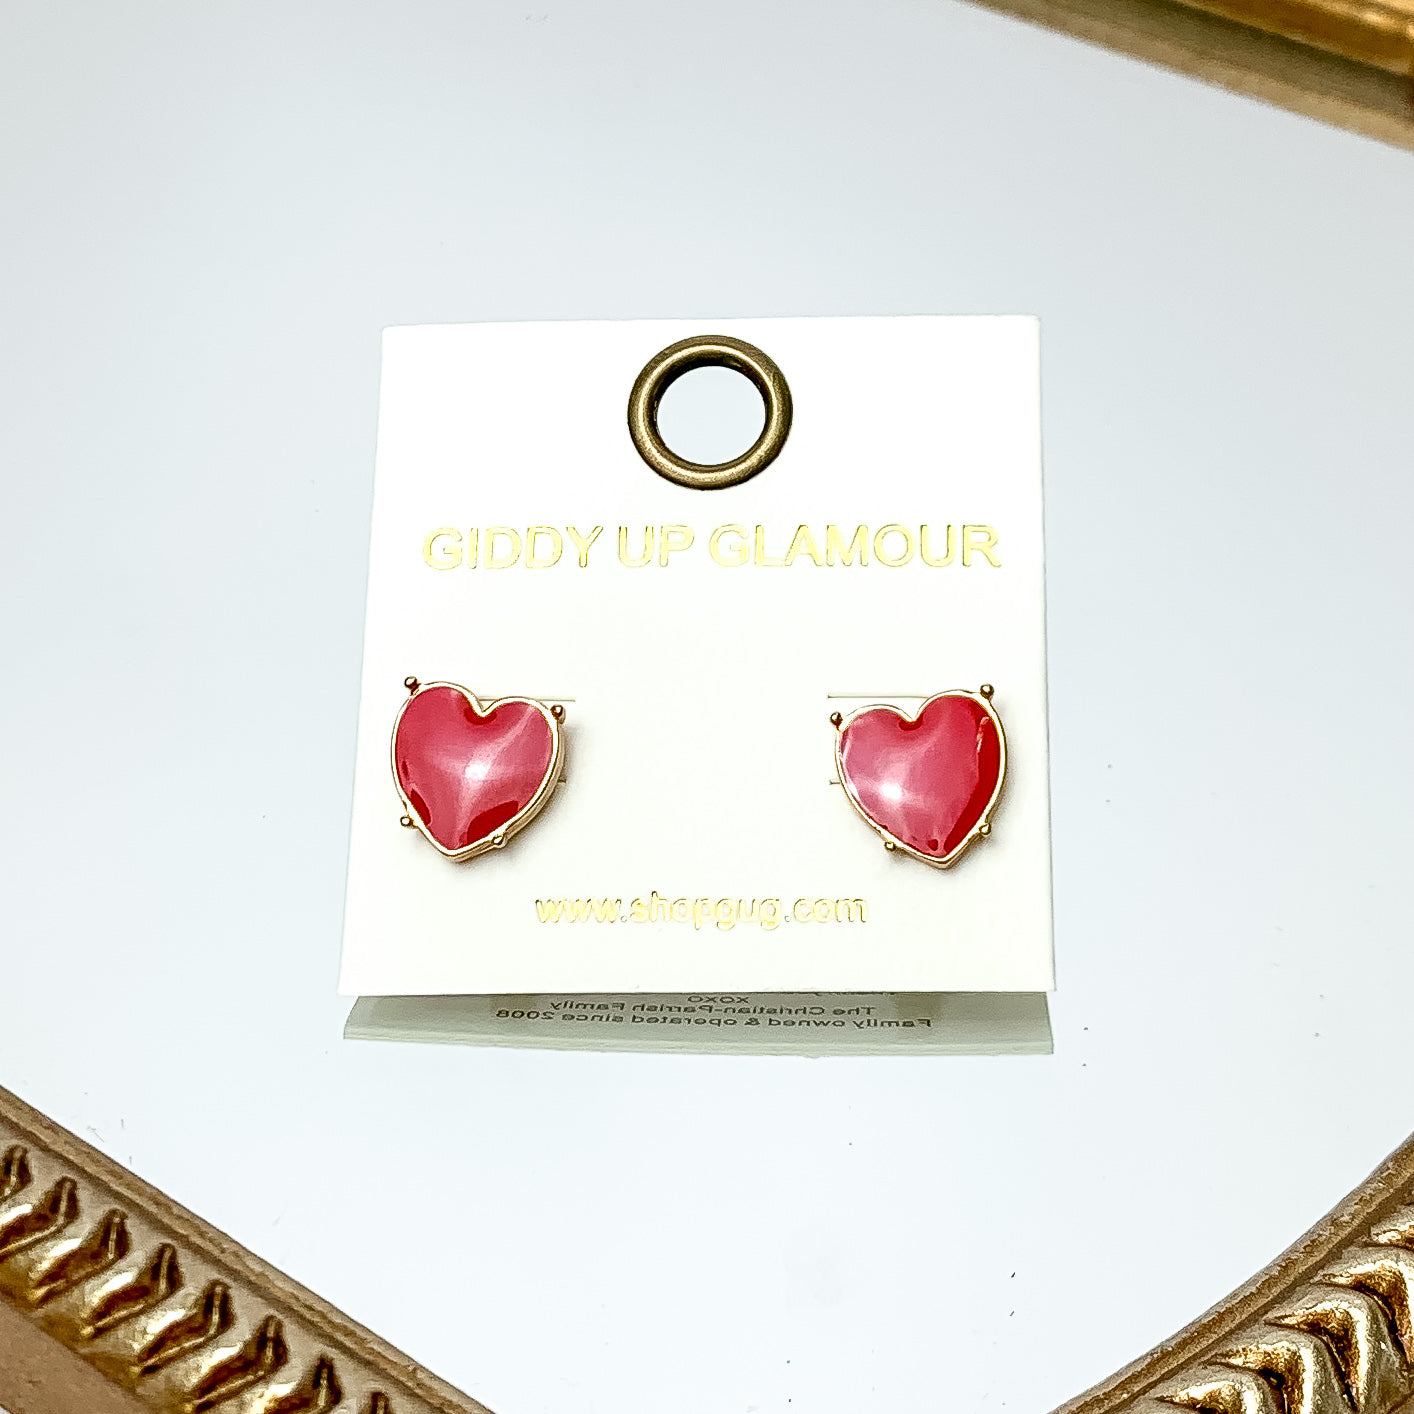 Gold Tone Heart Stud Earrings in Red. These earrings are pictured on a white background with a gold frame around.